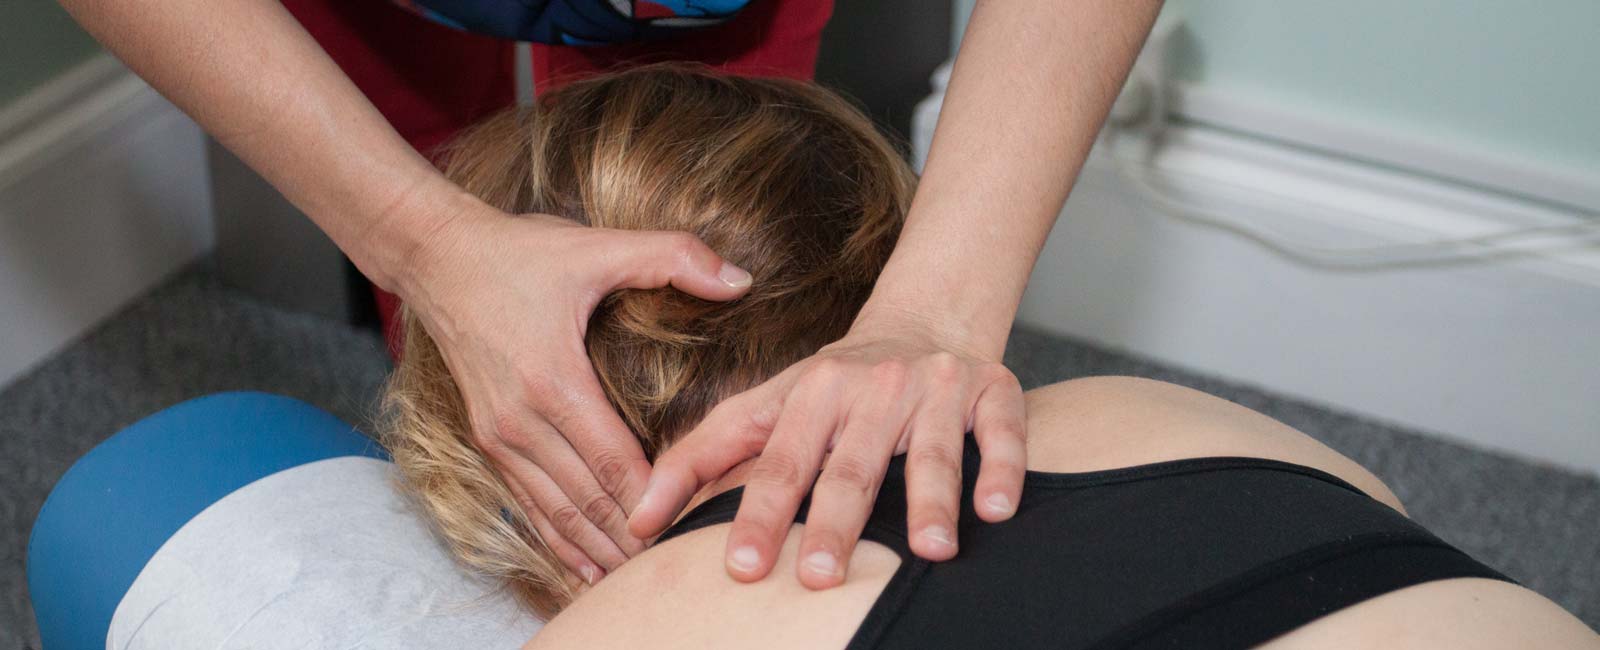 Chiropractic treatment of back, neck, shoulder, hip and other pain.